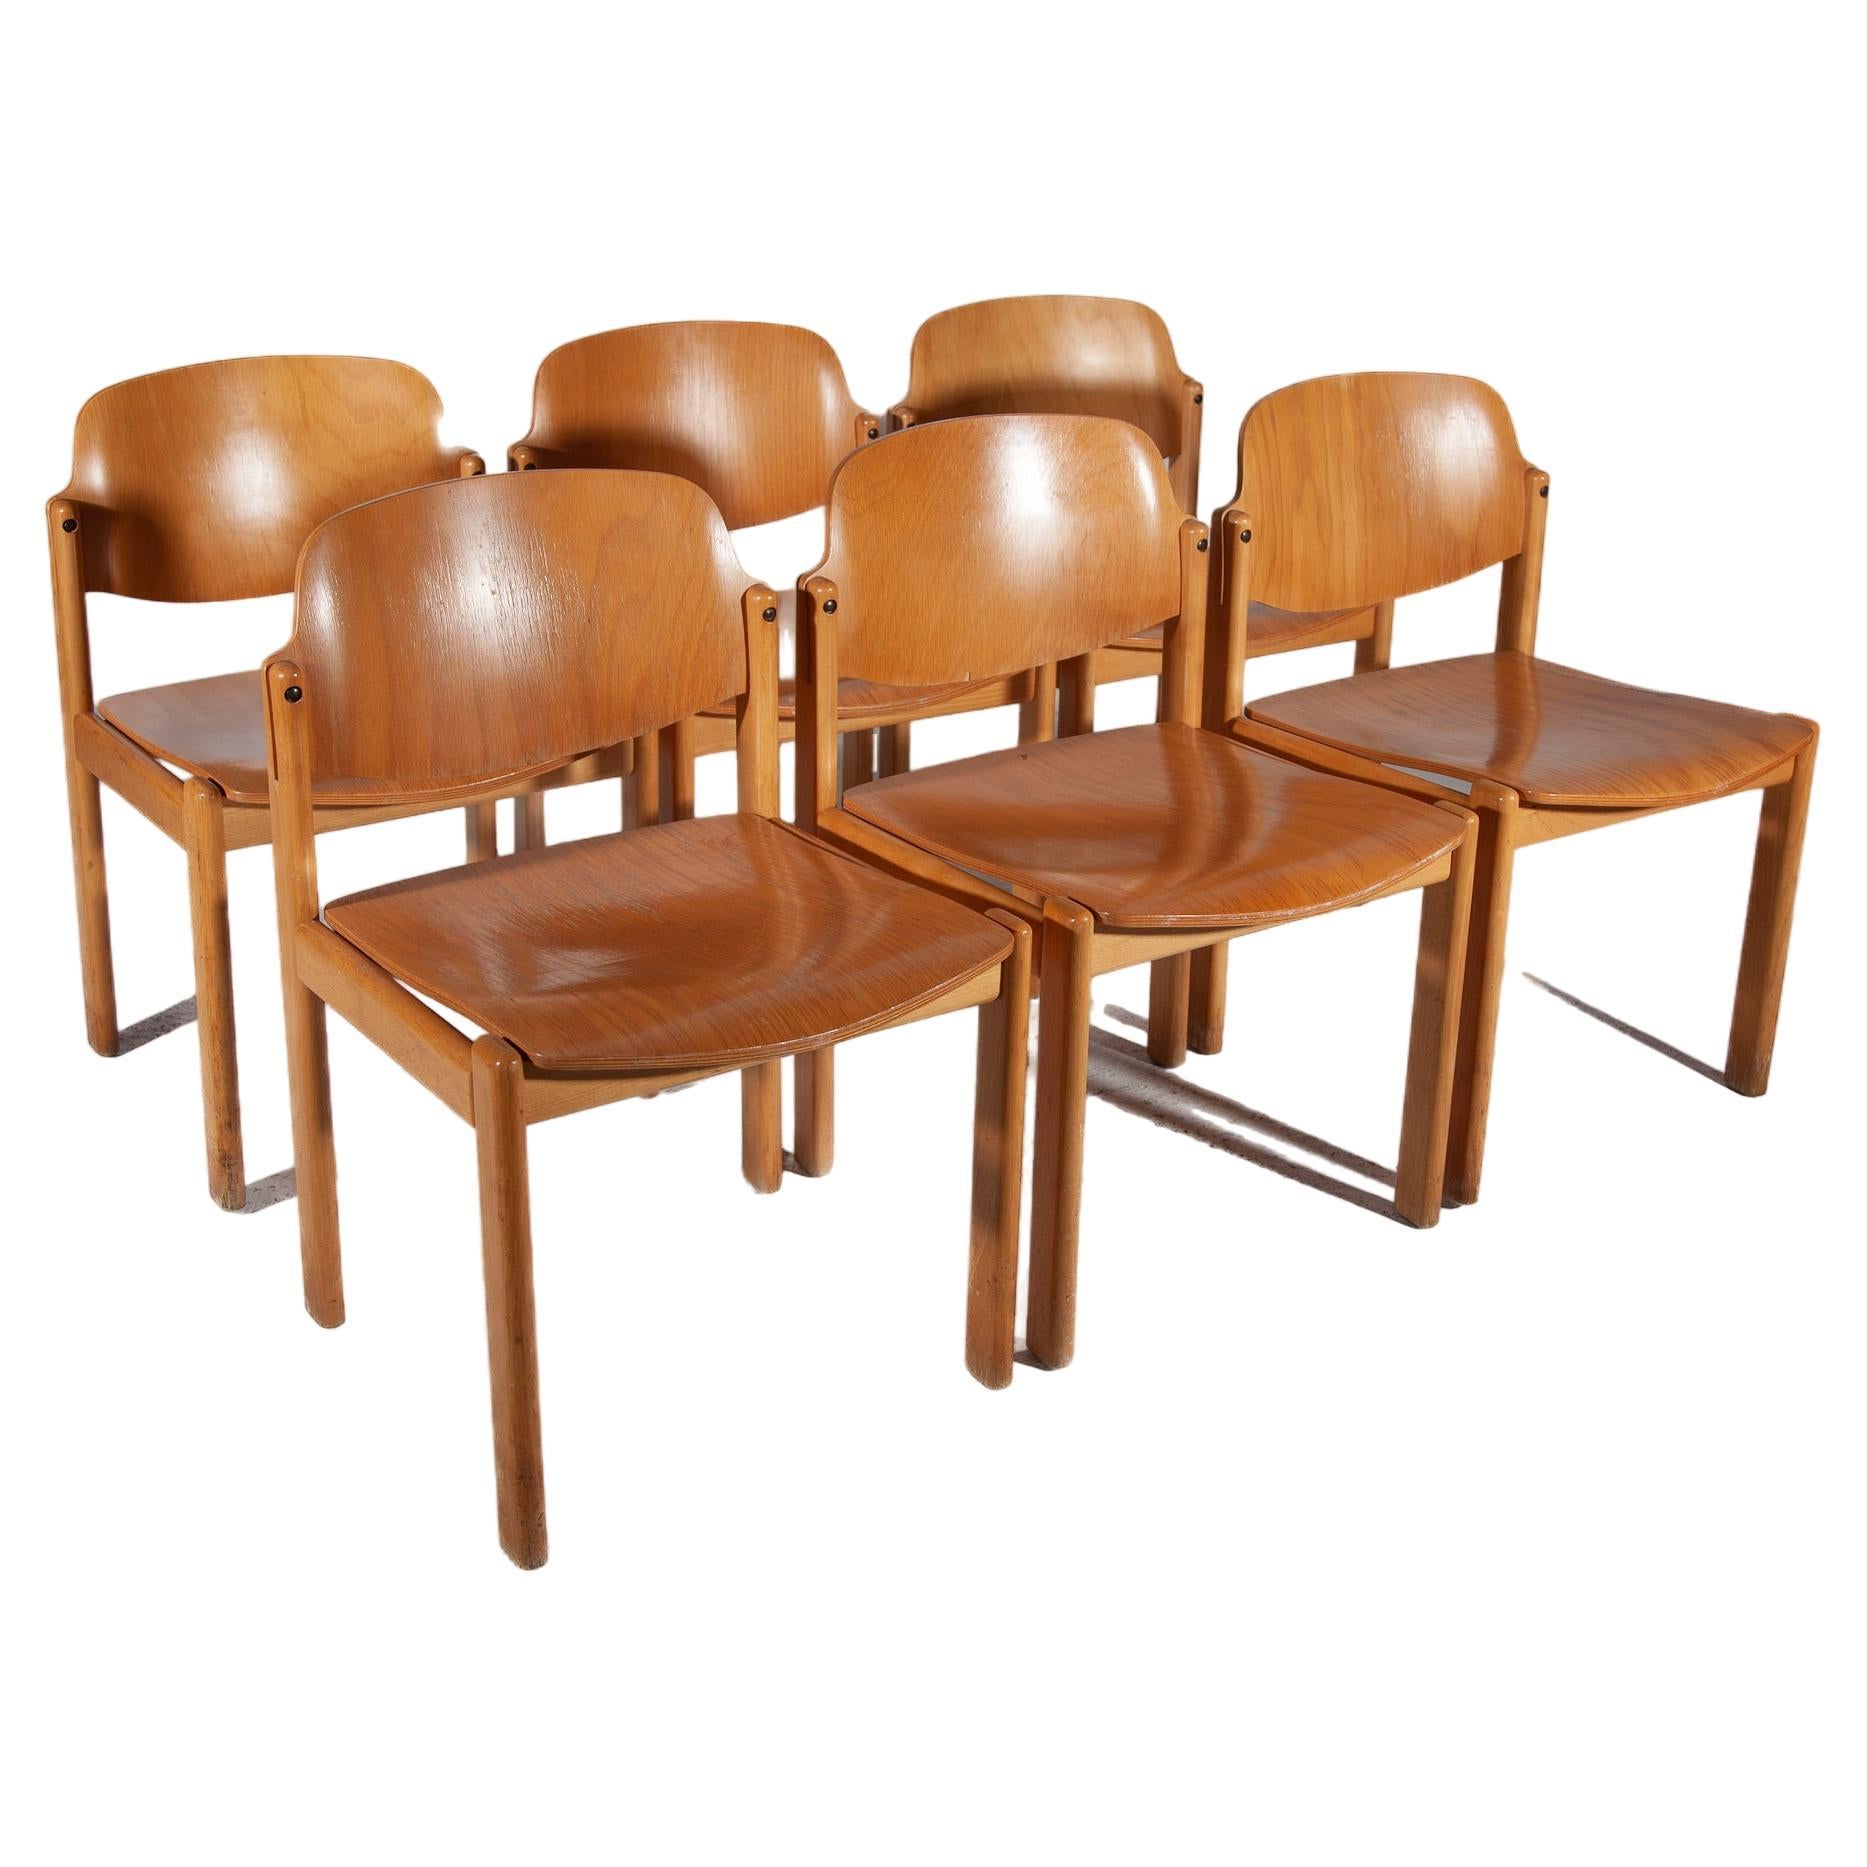 Set of 6 chairs in solid beech and plywood, Germany 1970s. The chairs are solid sturdy chairs, with high seating comfort for wooden chairs. The chairs are well made in a heavy quality, indestructible, durable.Price one item 12 pieces available.